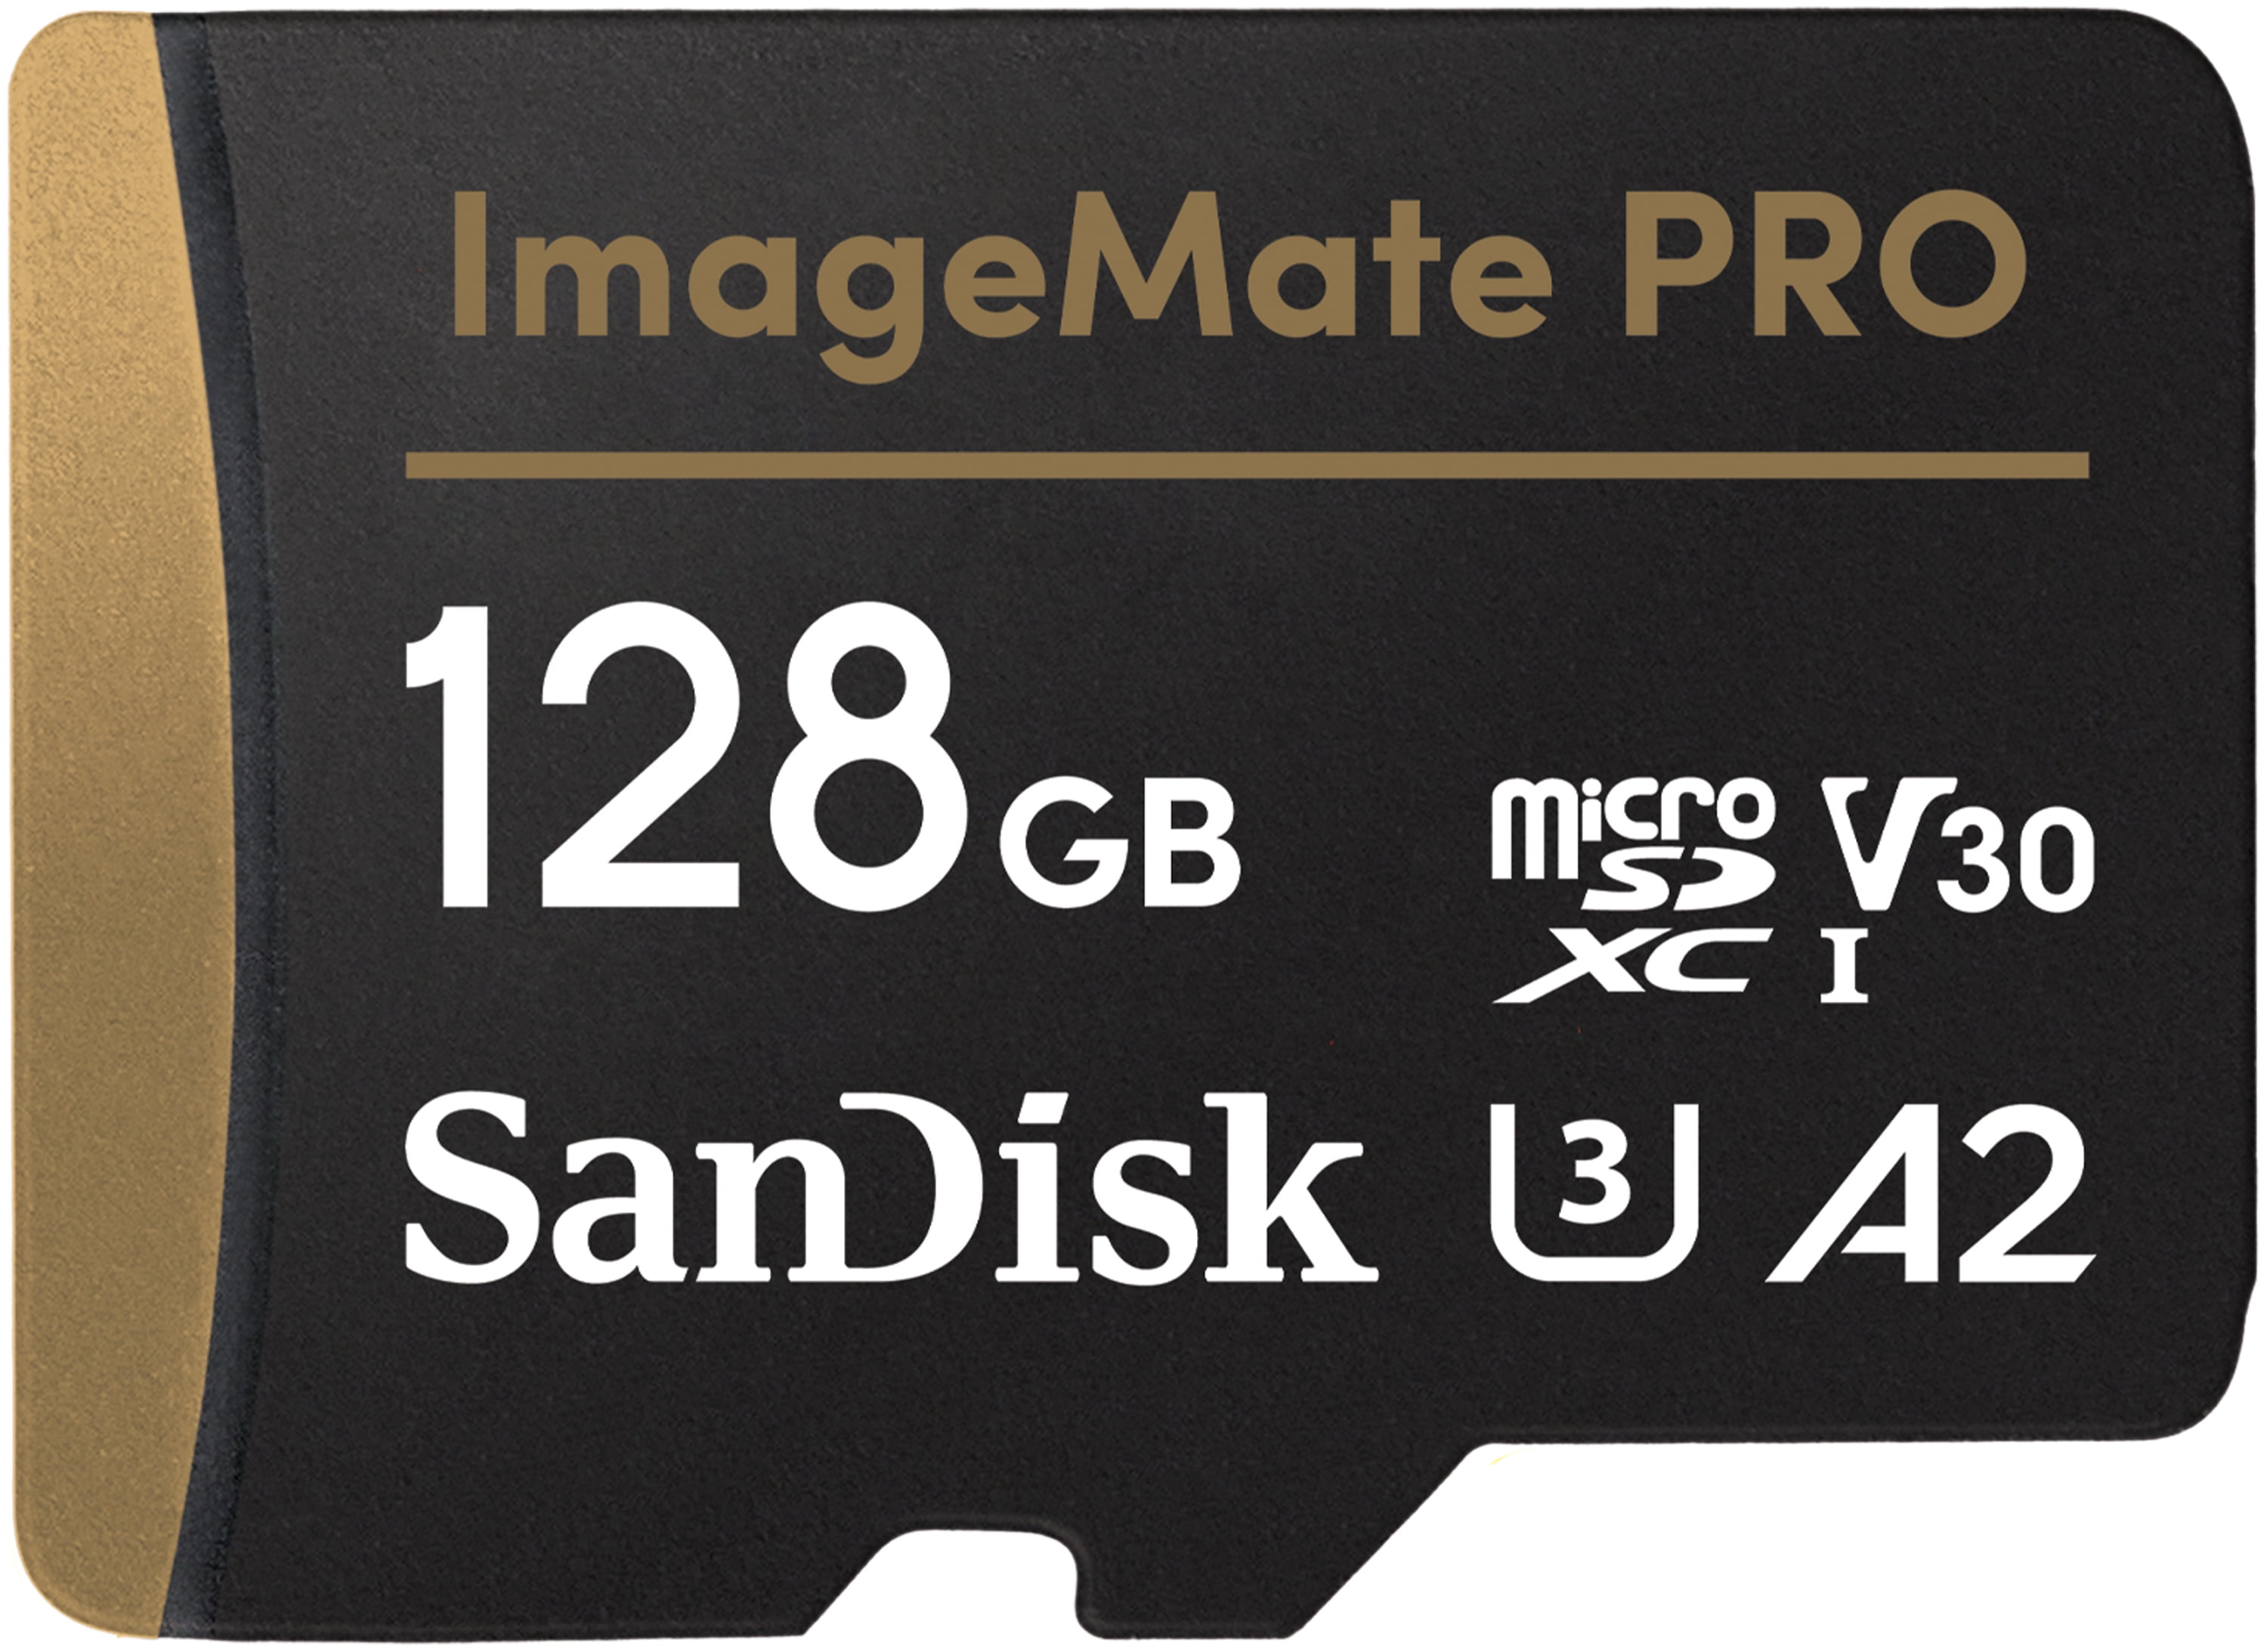 SanDisk Extreme Pro 170MB/s UHS-I U3 V30 128GB SDXC Card Review - Camera  Memory Speed Comparison & Performance tests for SD and CF cards